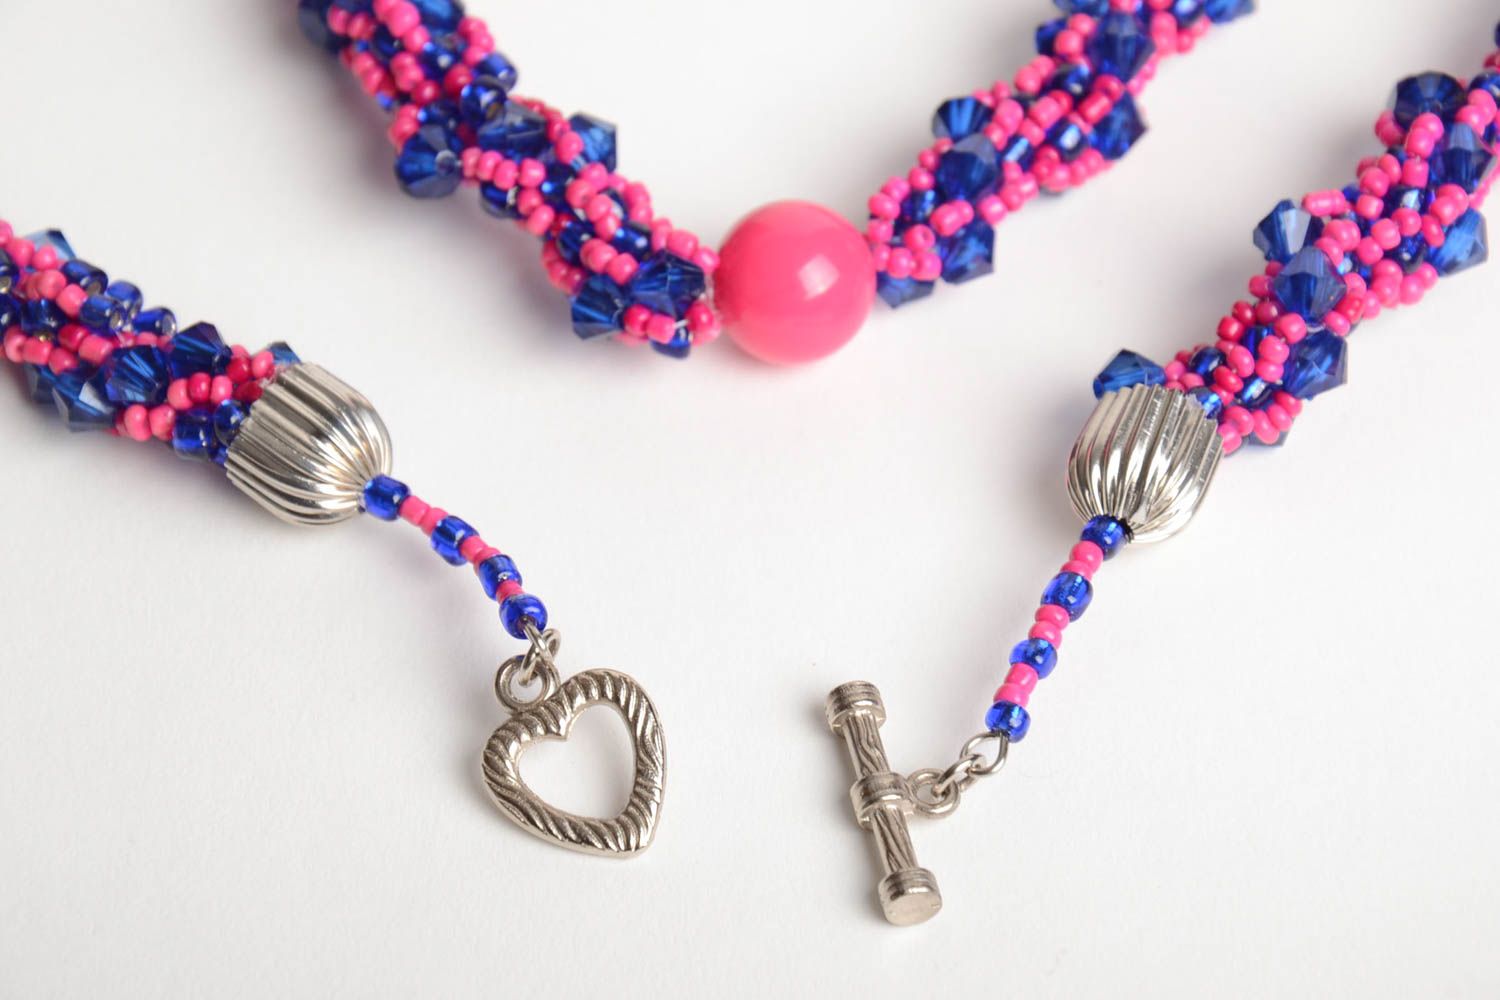 Handmade designer women's necklace crocheted of bright pink and blue Czech beads photo 5